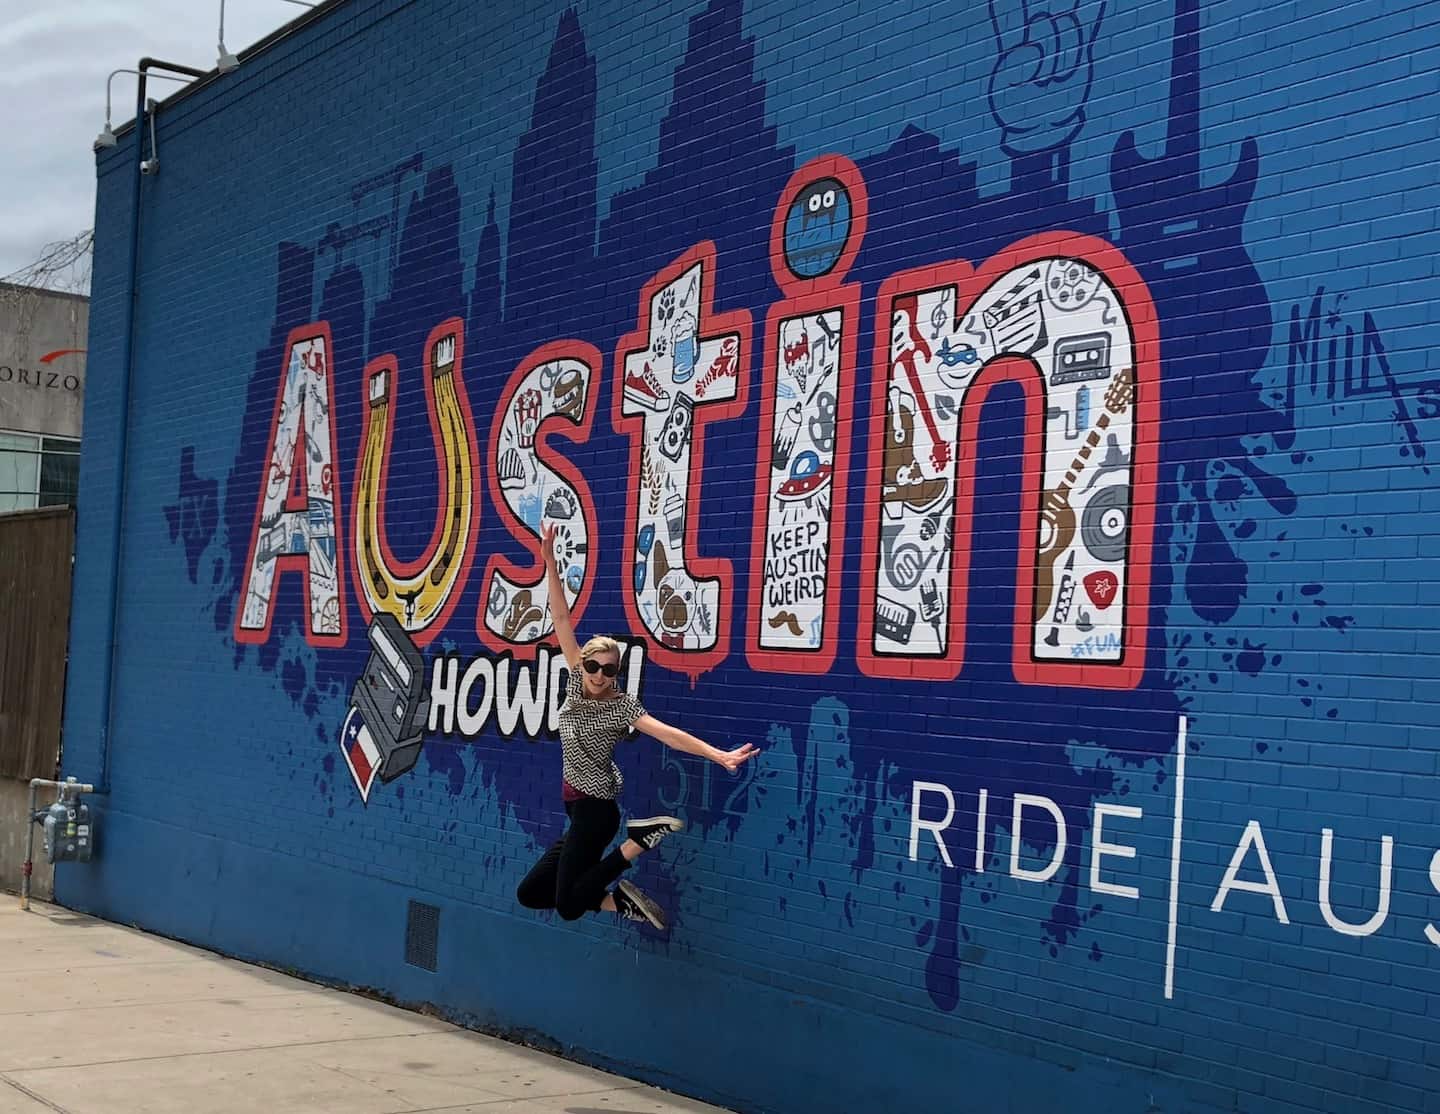 There are plenty of reasons to love Austin (including street art!). Read on for more features that make this laid-back city great for Texas travel! To & Fro Fam